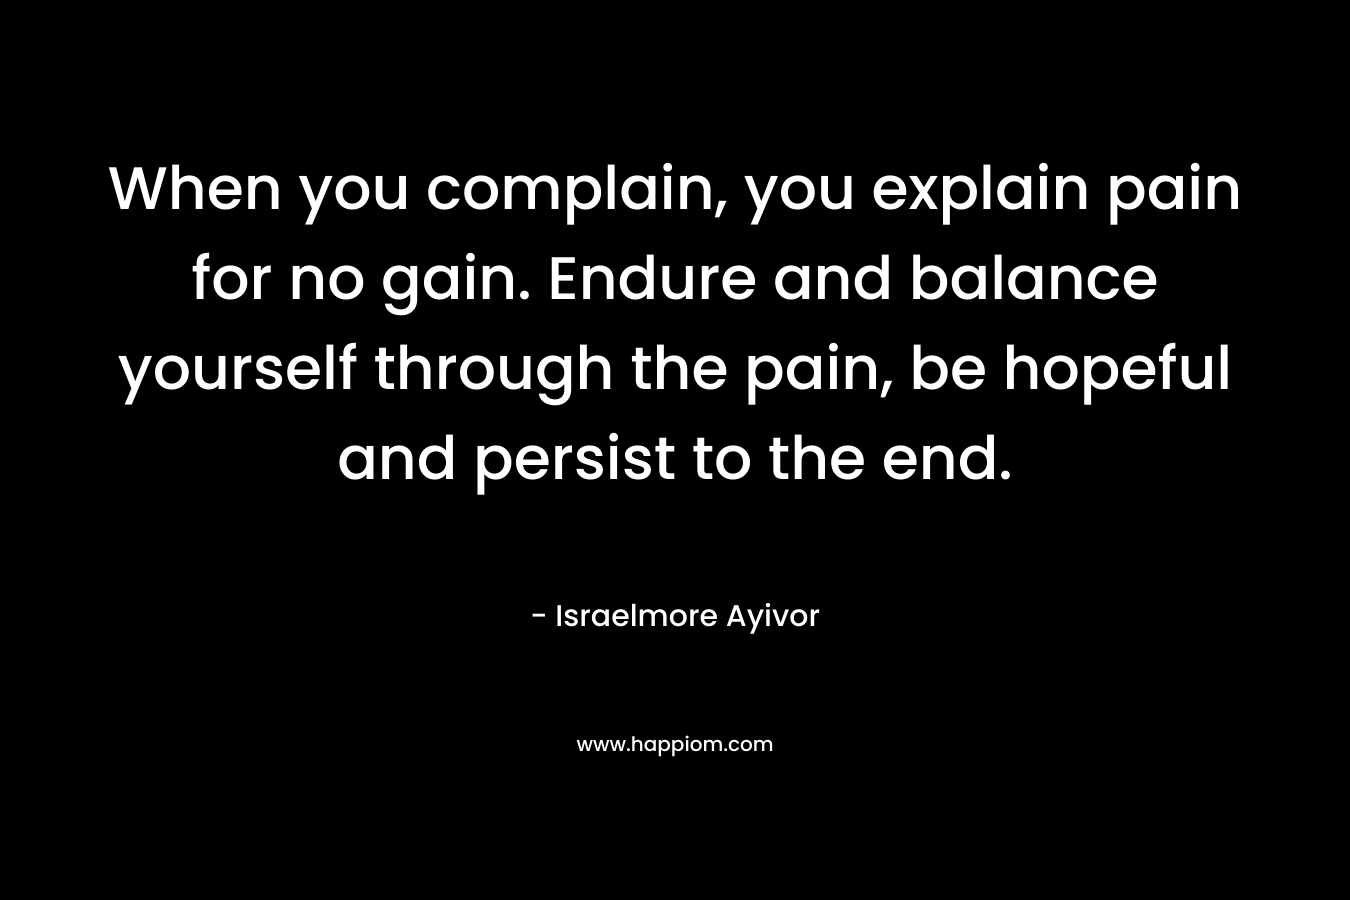 When you complain, you explain pain for no gain. Endure and balance yourself through the pain, be hopeful and persist to the end. – Israelmore Ayivor